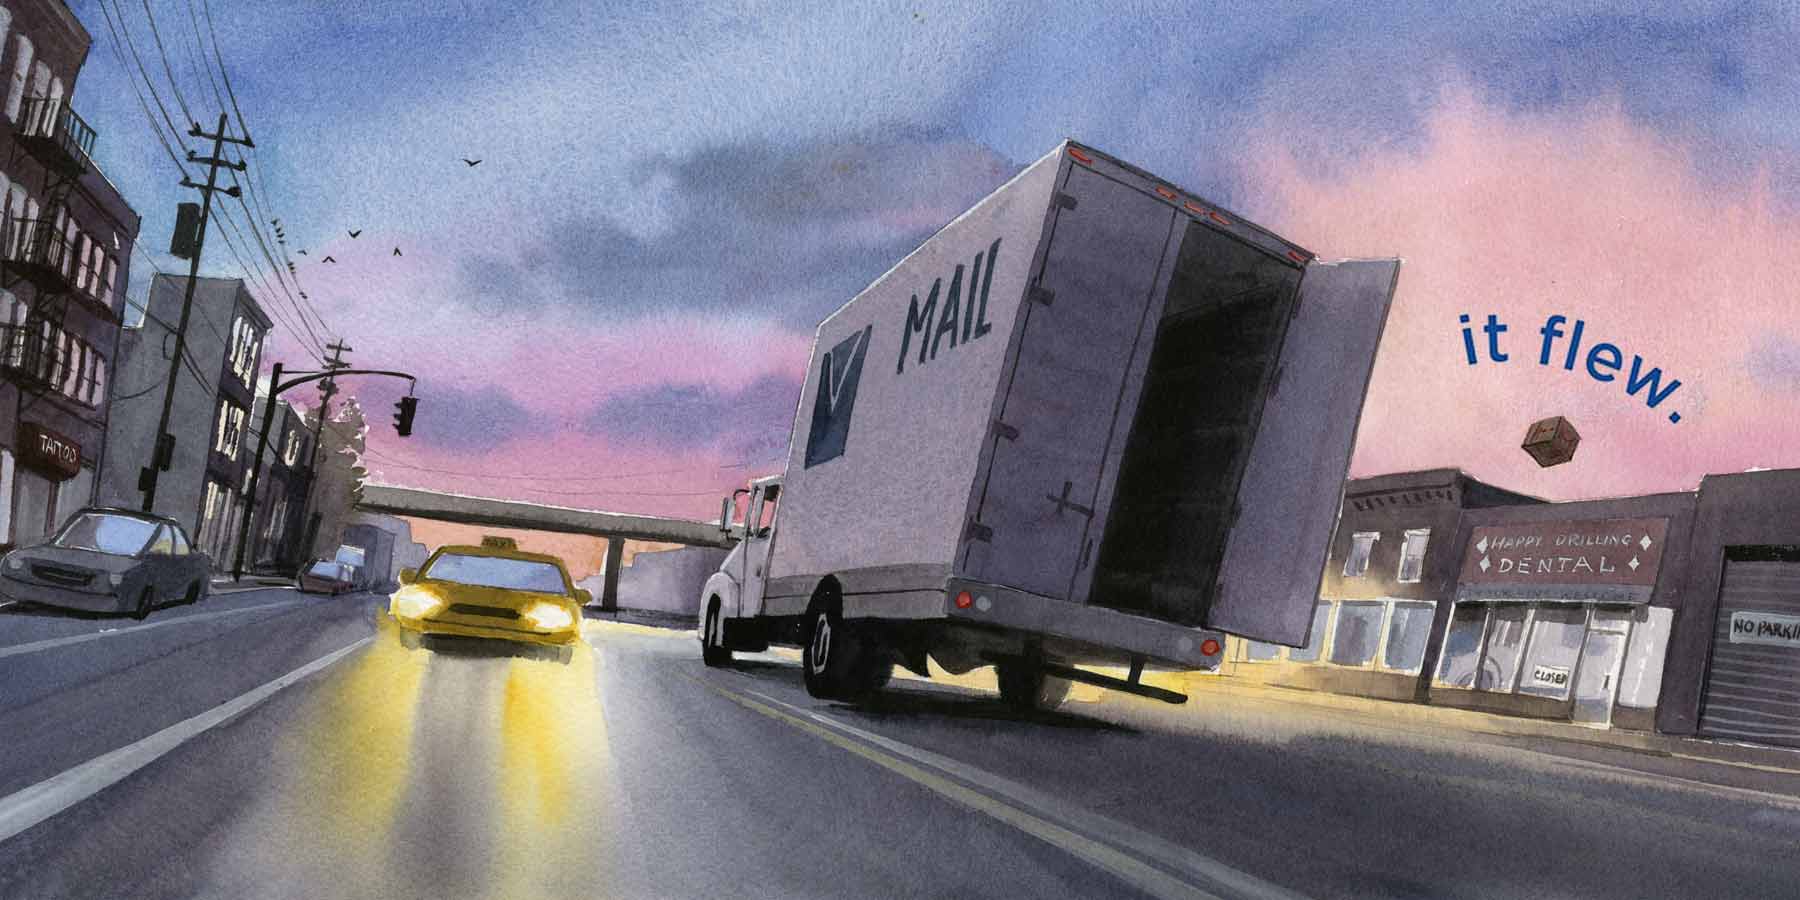 Watercolor illustration by Jessica Lanan from 'The Lost Package' Showing a truck driving down a road in pre-dawn light with one door open and a package flying out of the back.